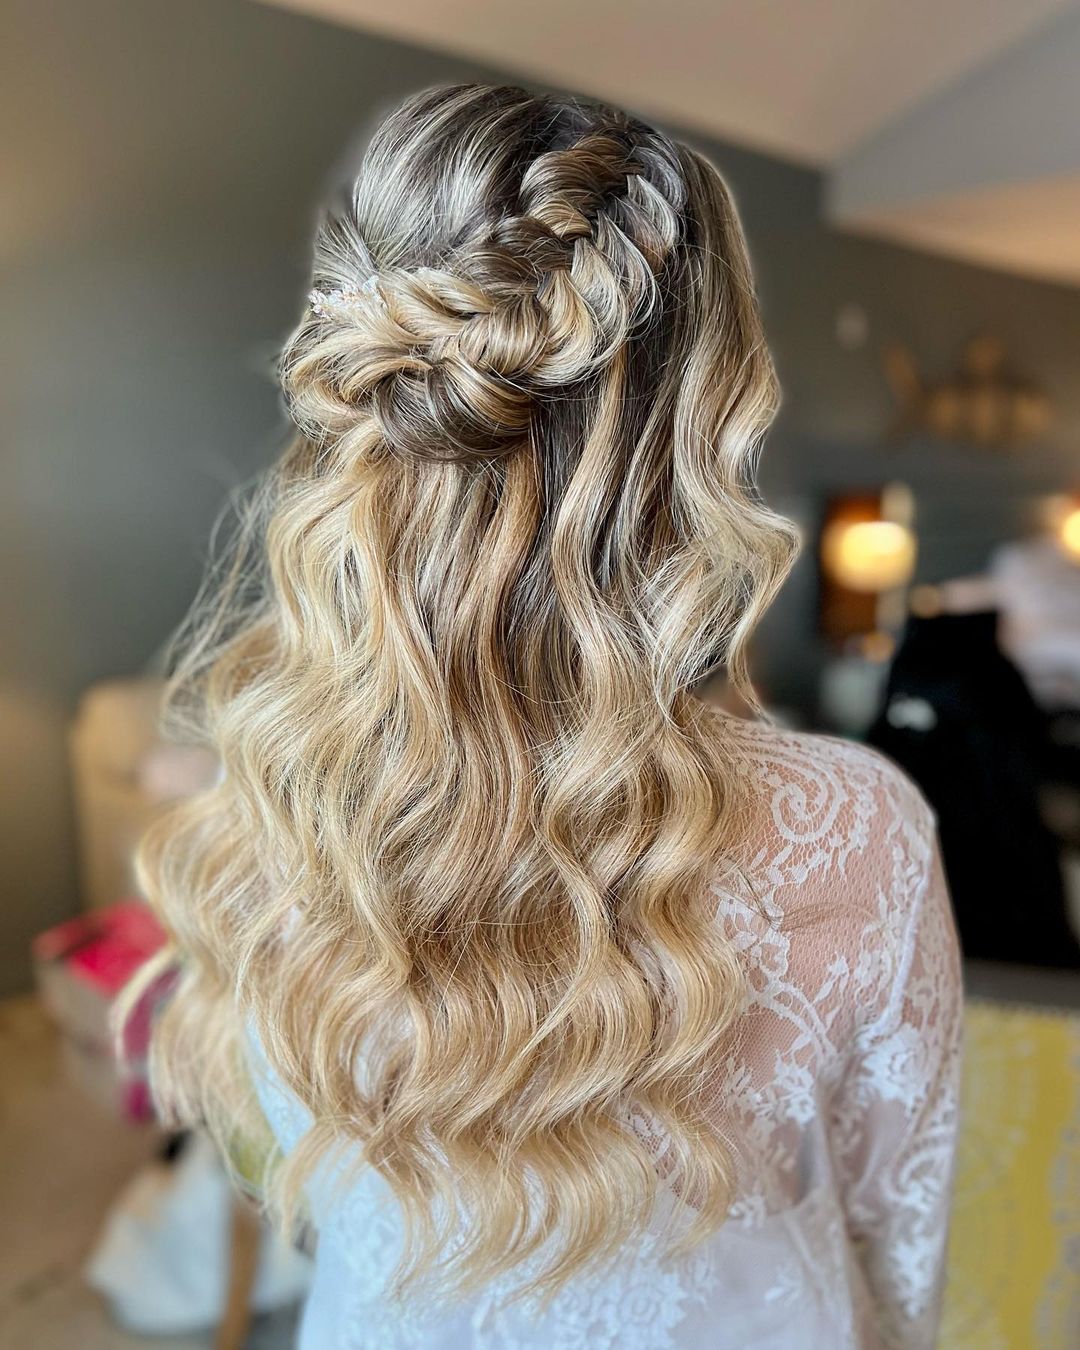 10 Beautiful Braid Hairstyles for Wedding Day | Hair Inspiration